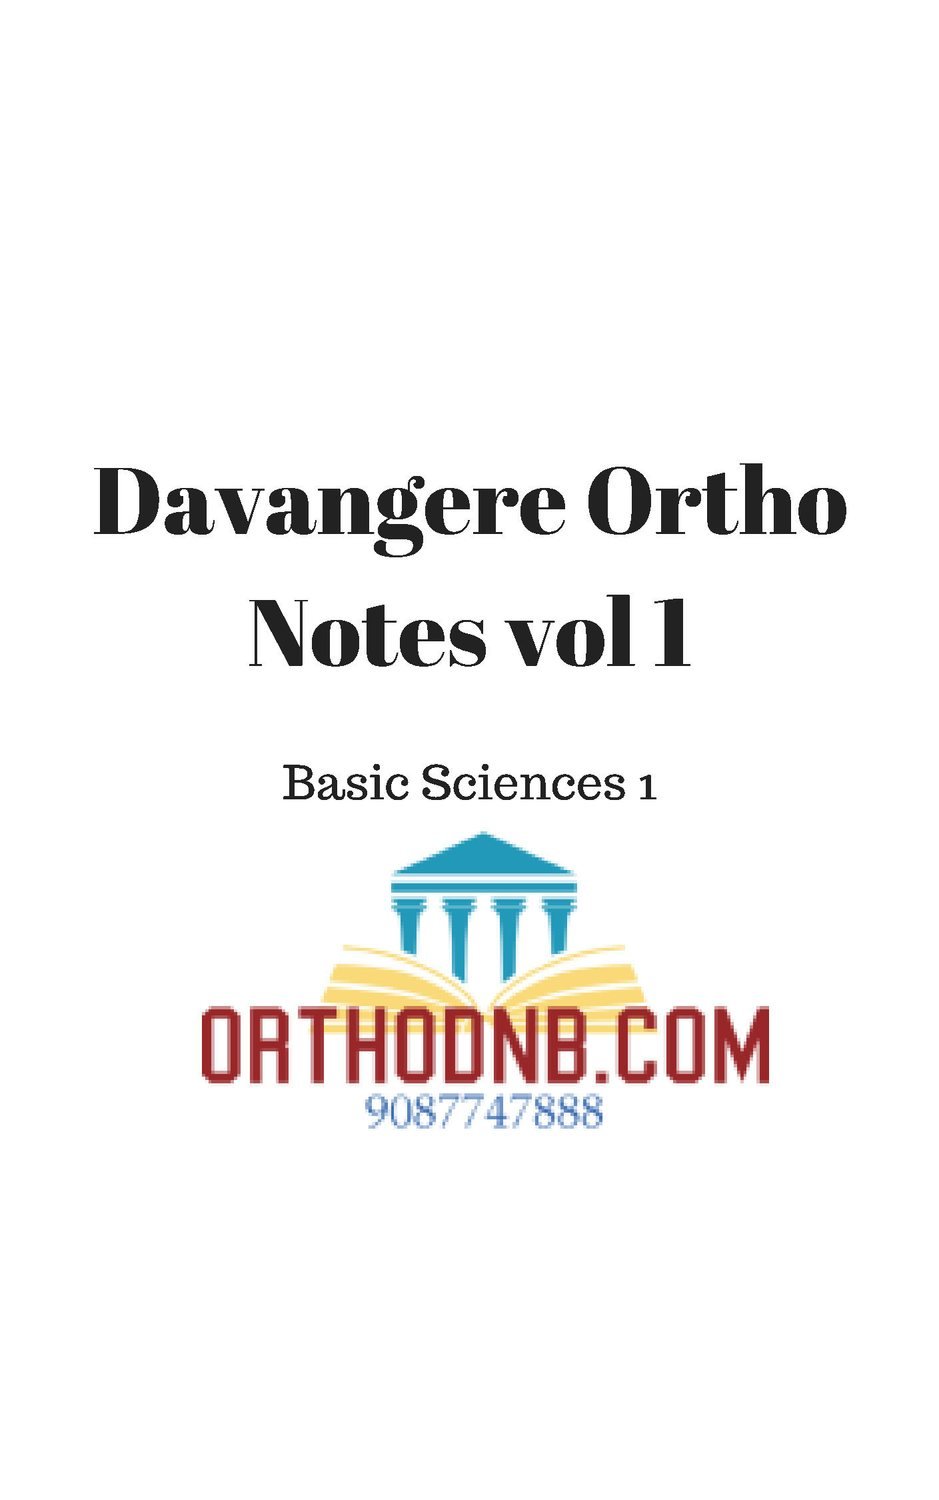 Davangere orthopaedic Notes 2022 edition